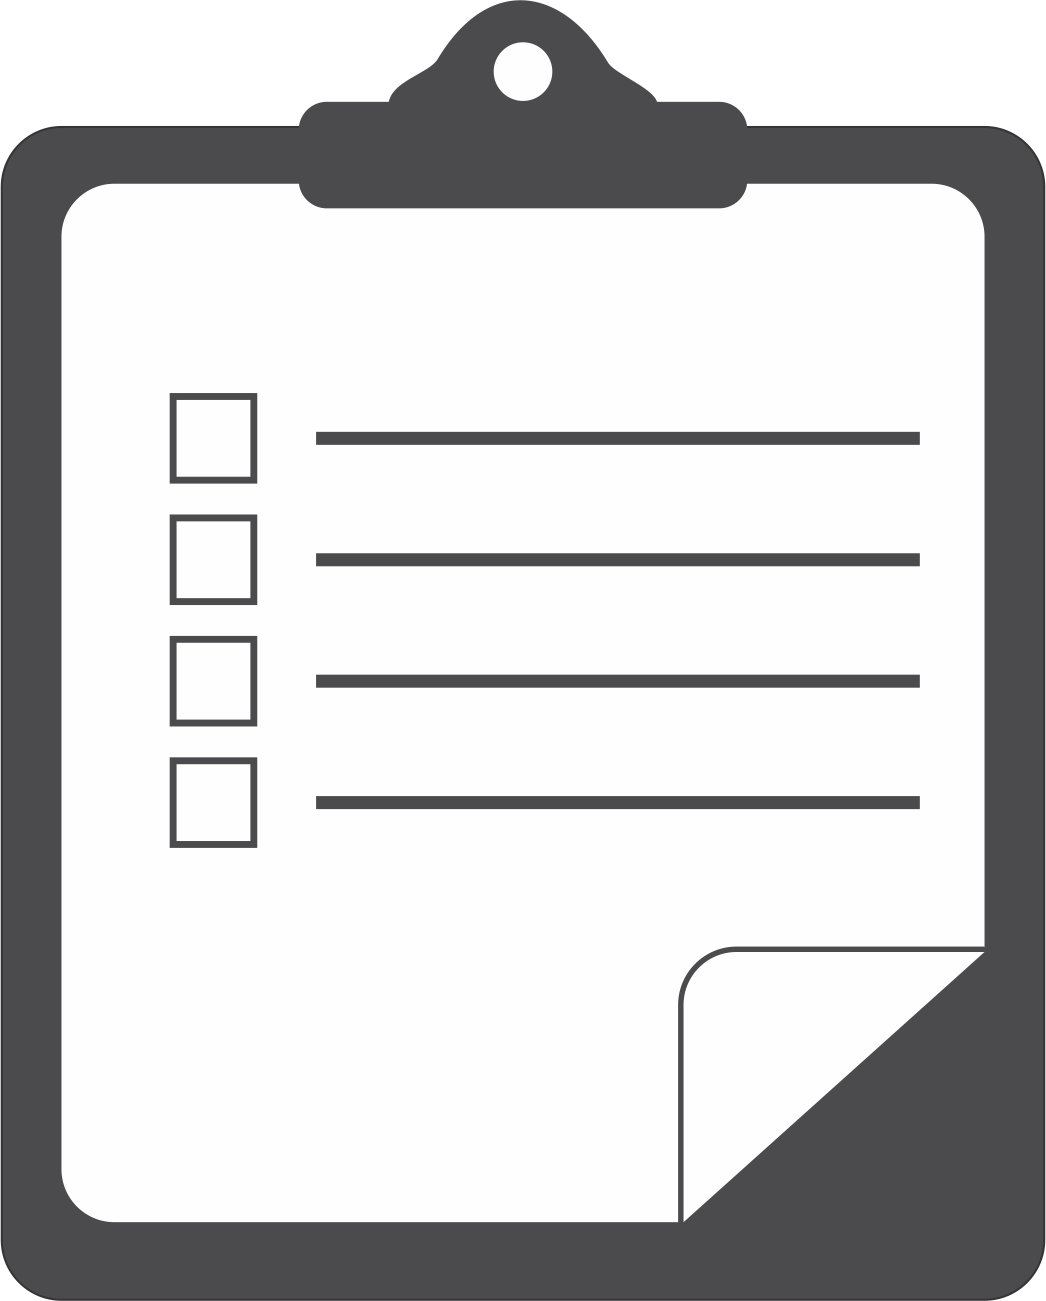 Free Blank Checklist Cliparts, Download Free Blank Checklist Cliparts